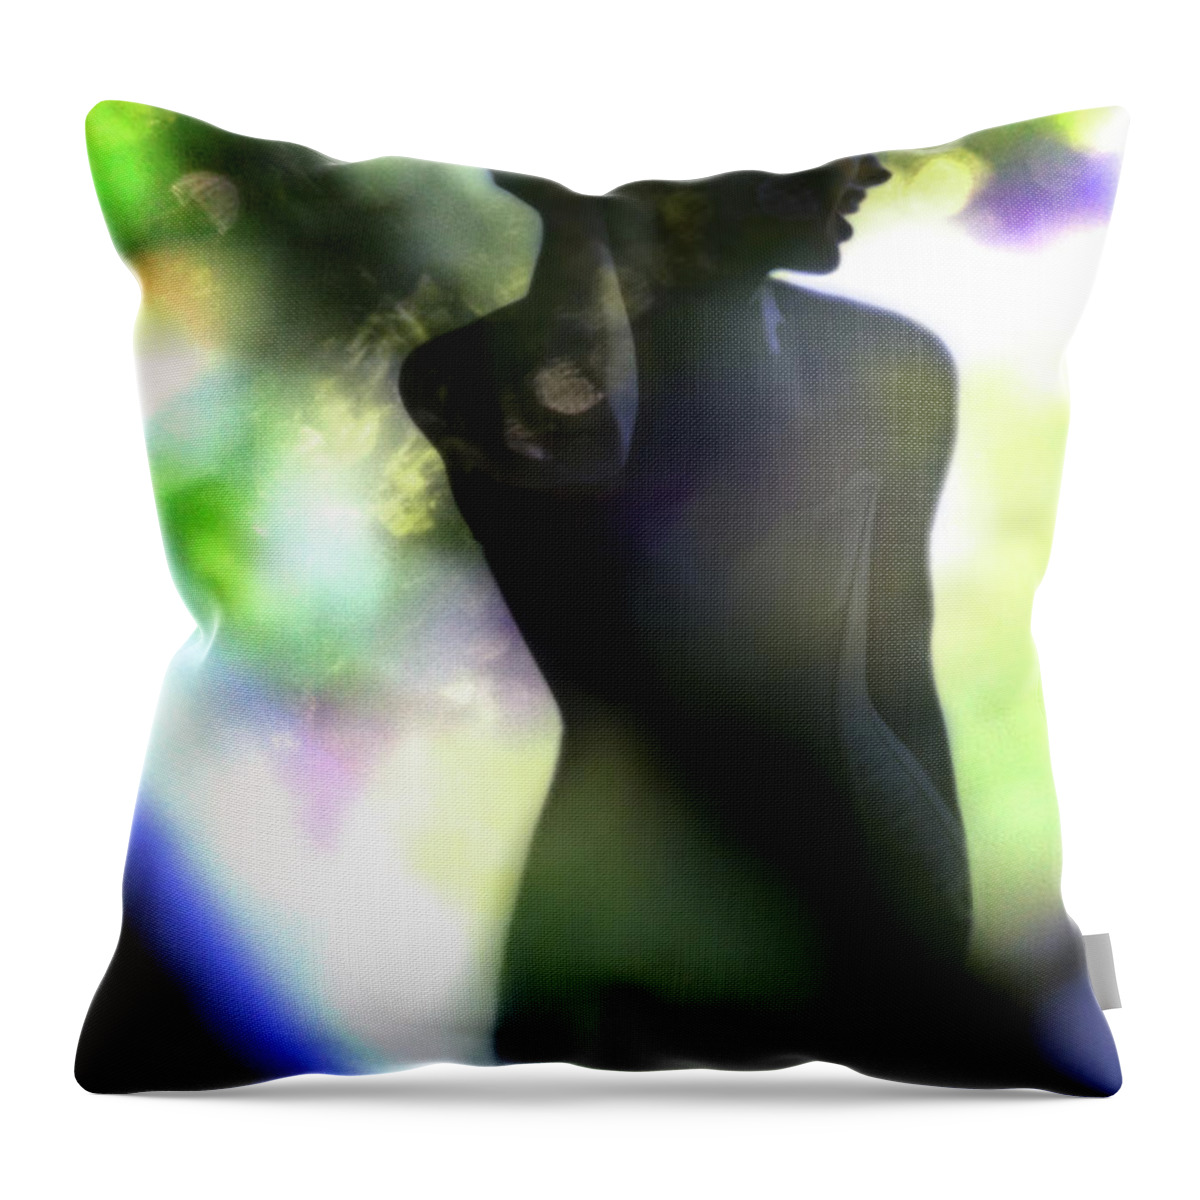 Woman Throw Pillow featuring the photograph Lola by Richard Piper